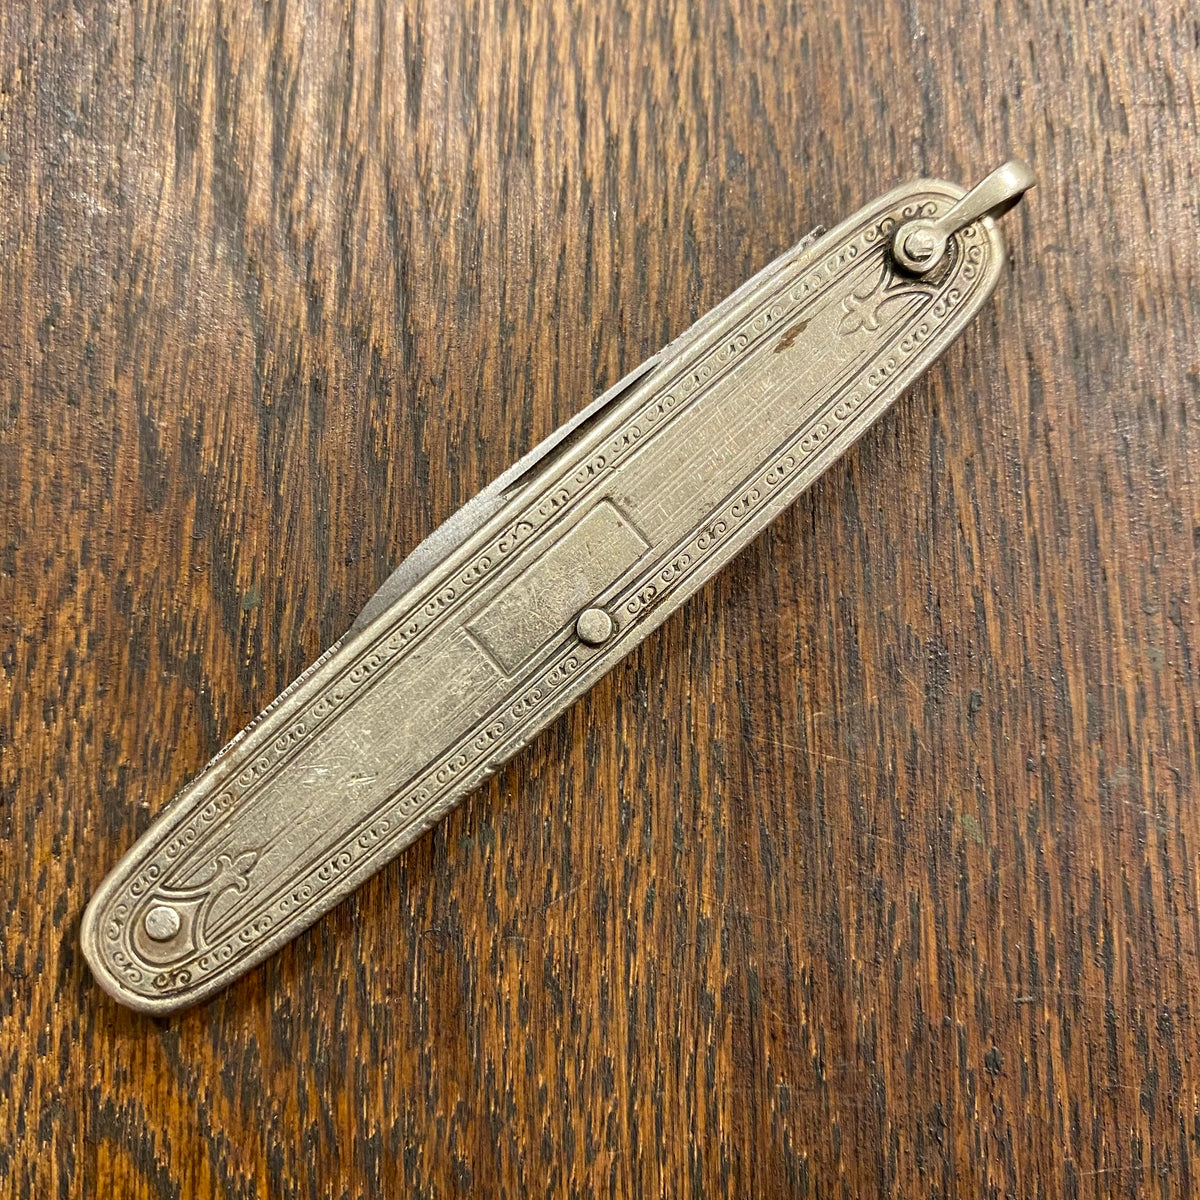 LF&C  3” Pen Carbon Blade Silverplate Scales 1912-1950